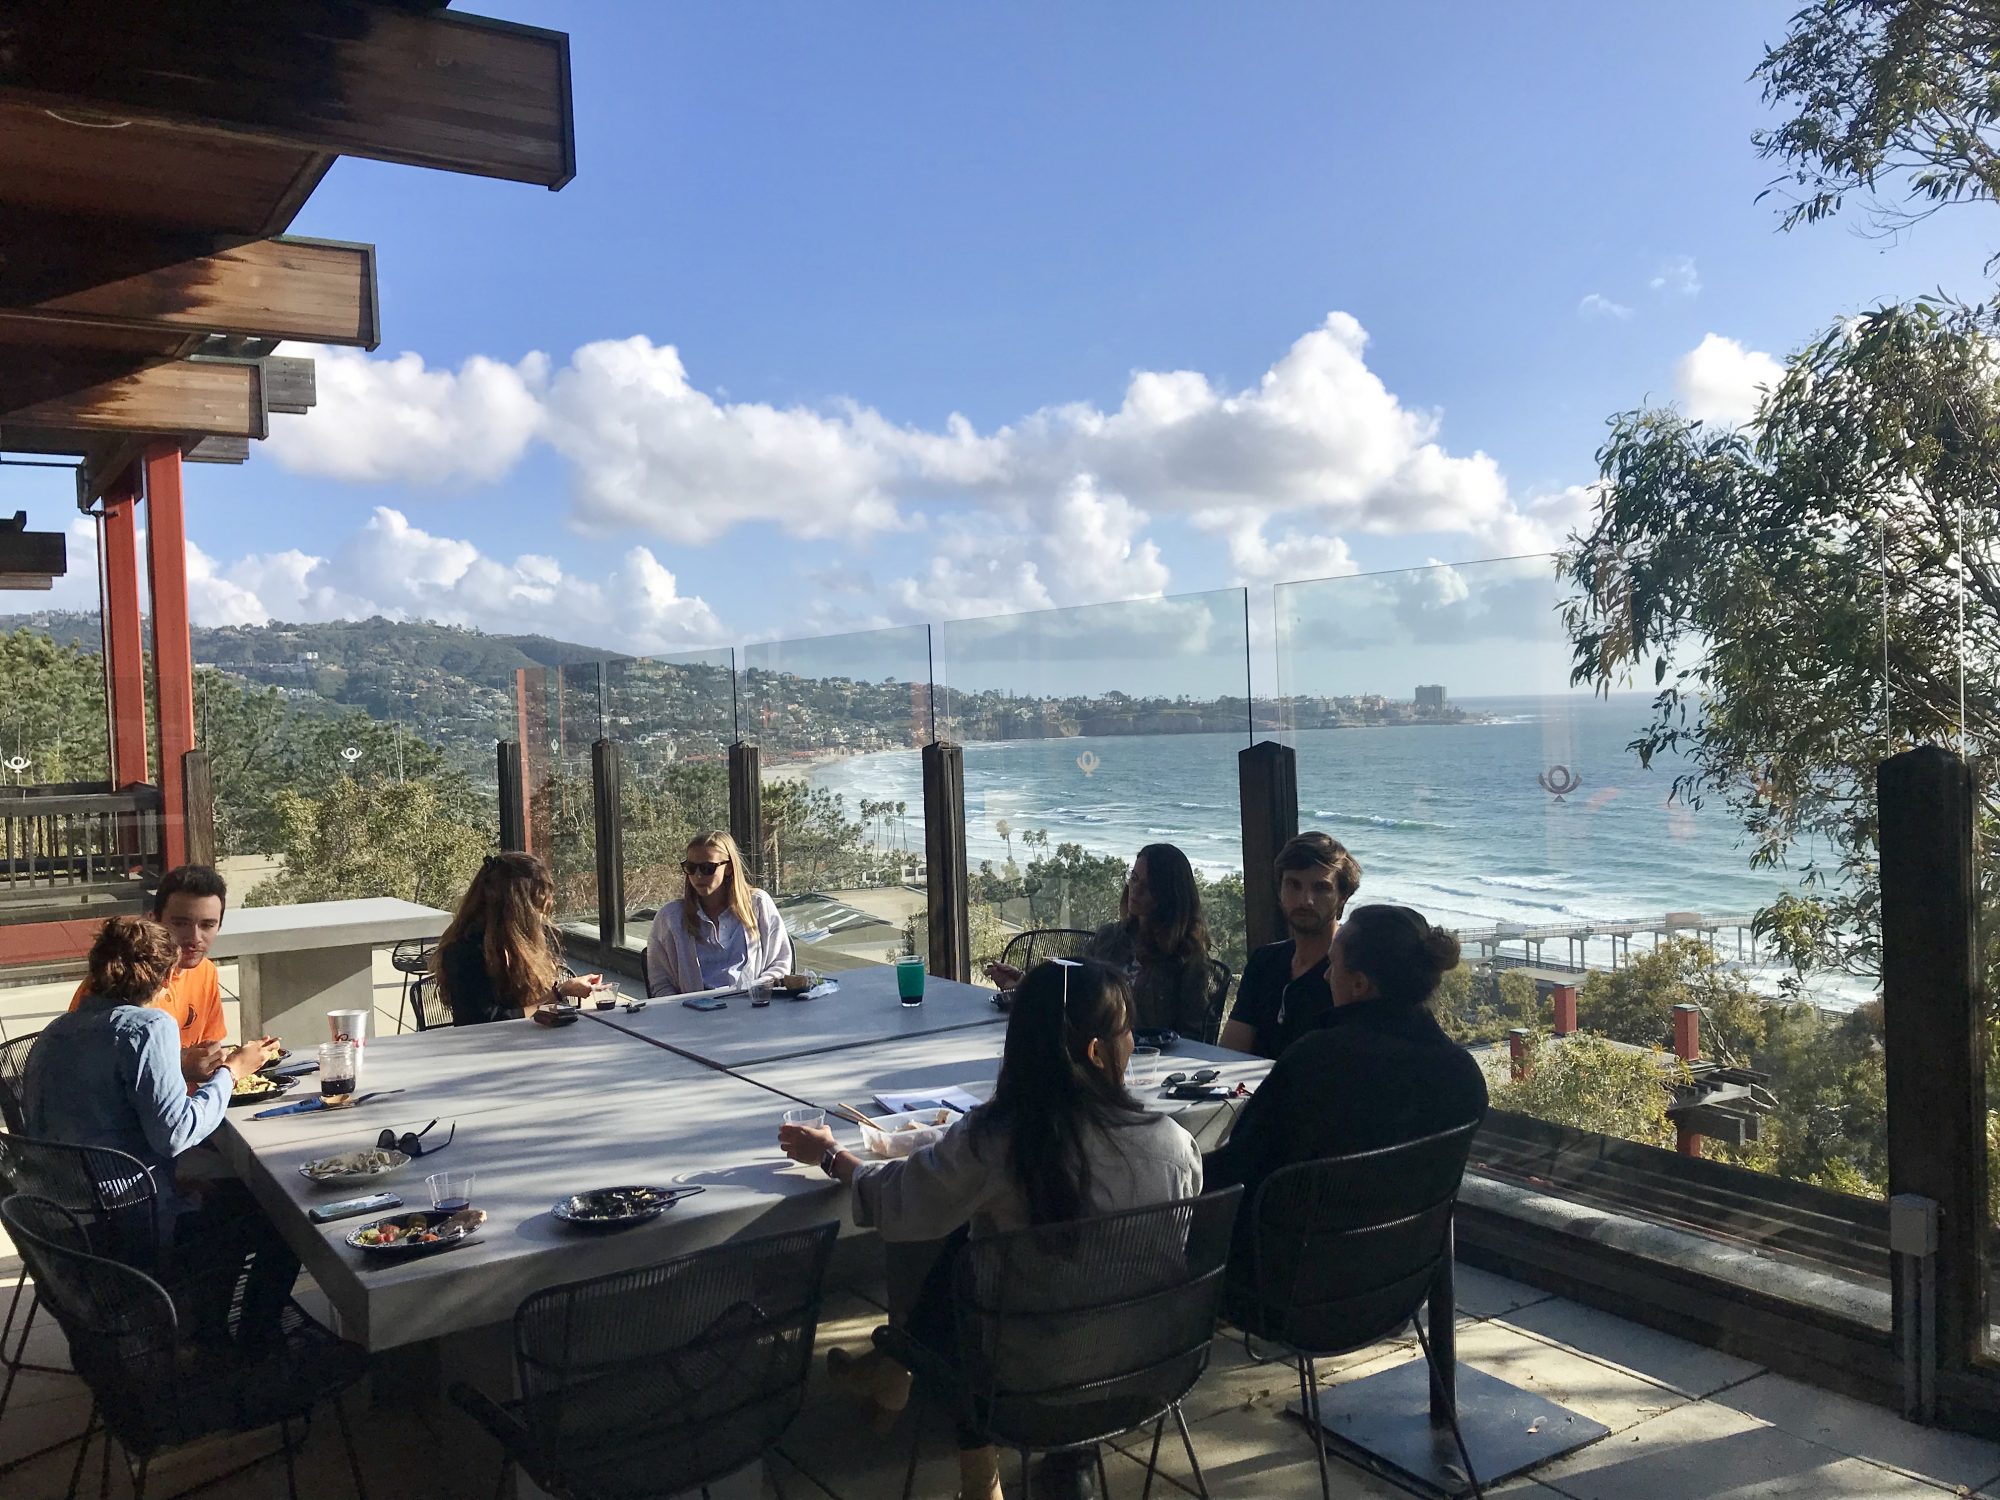 CSP students eat at table overlooking Pacific Ocean.